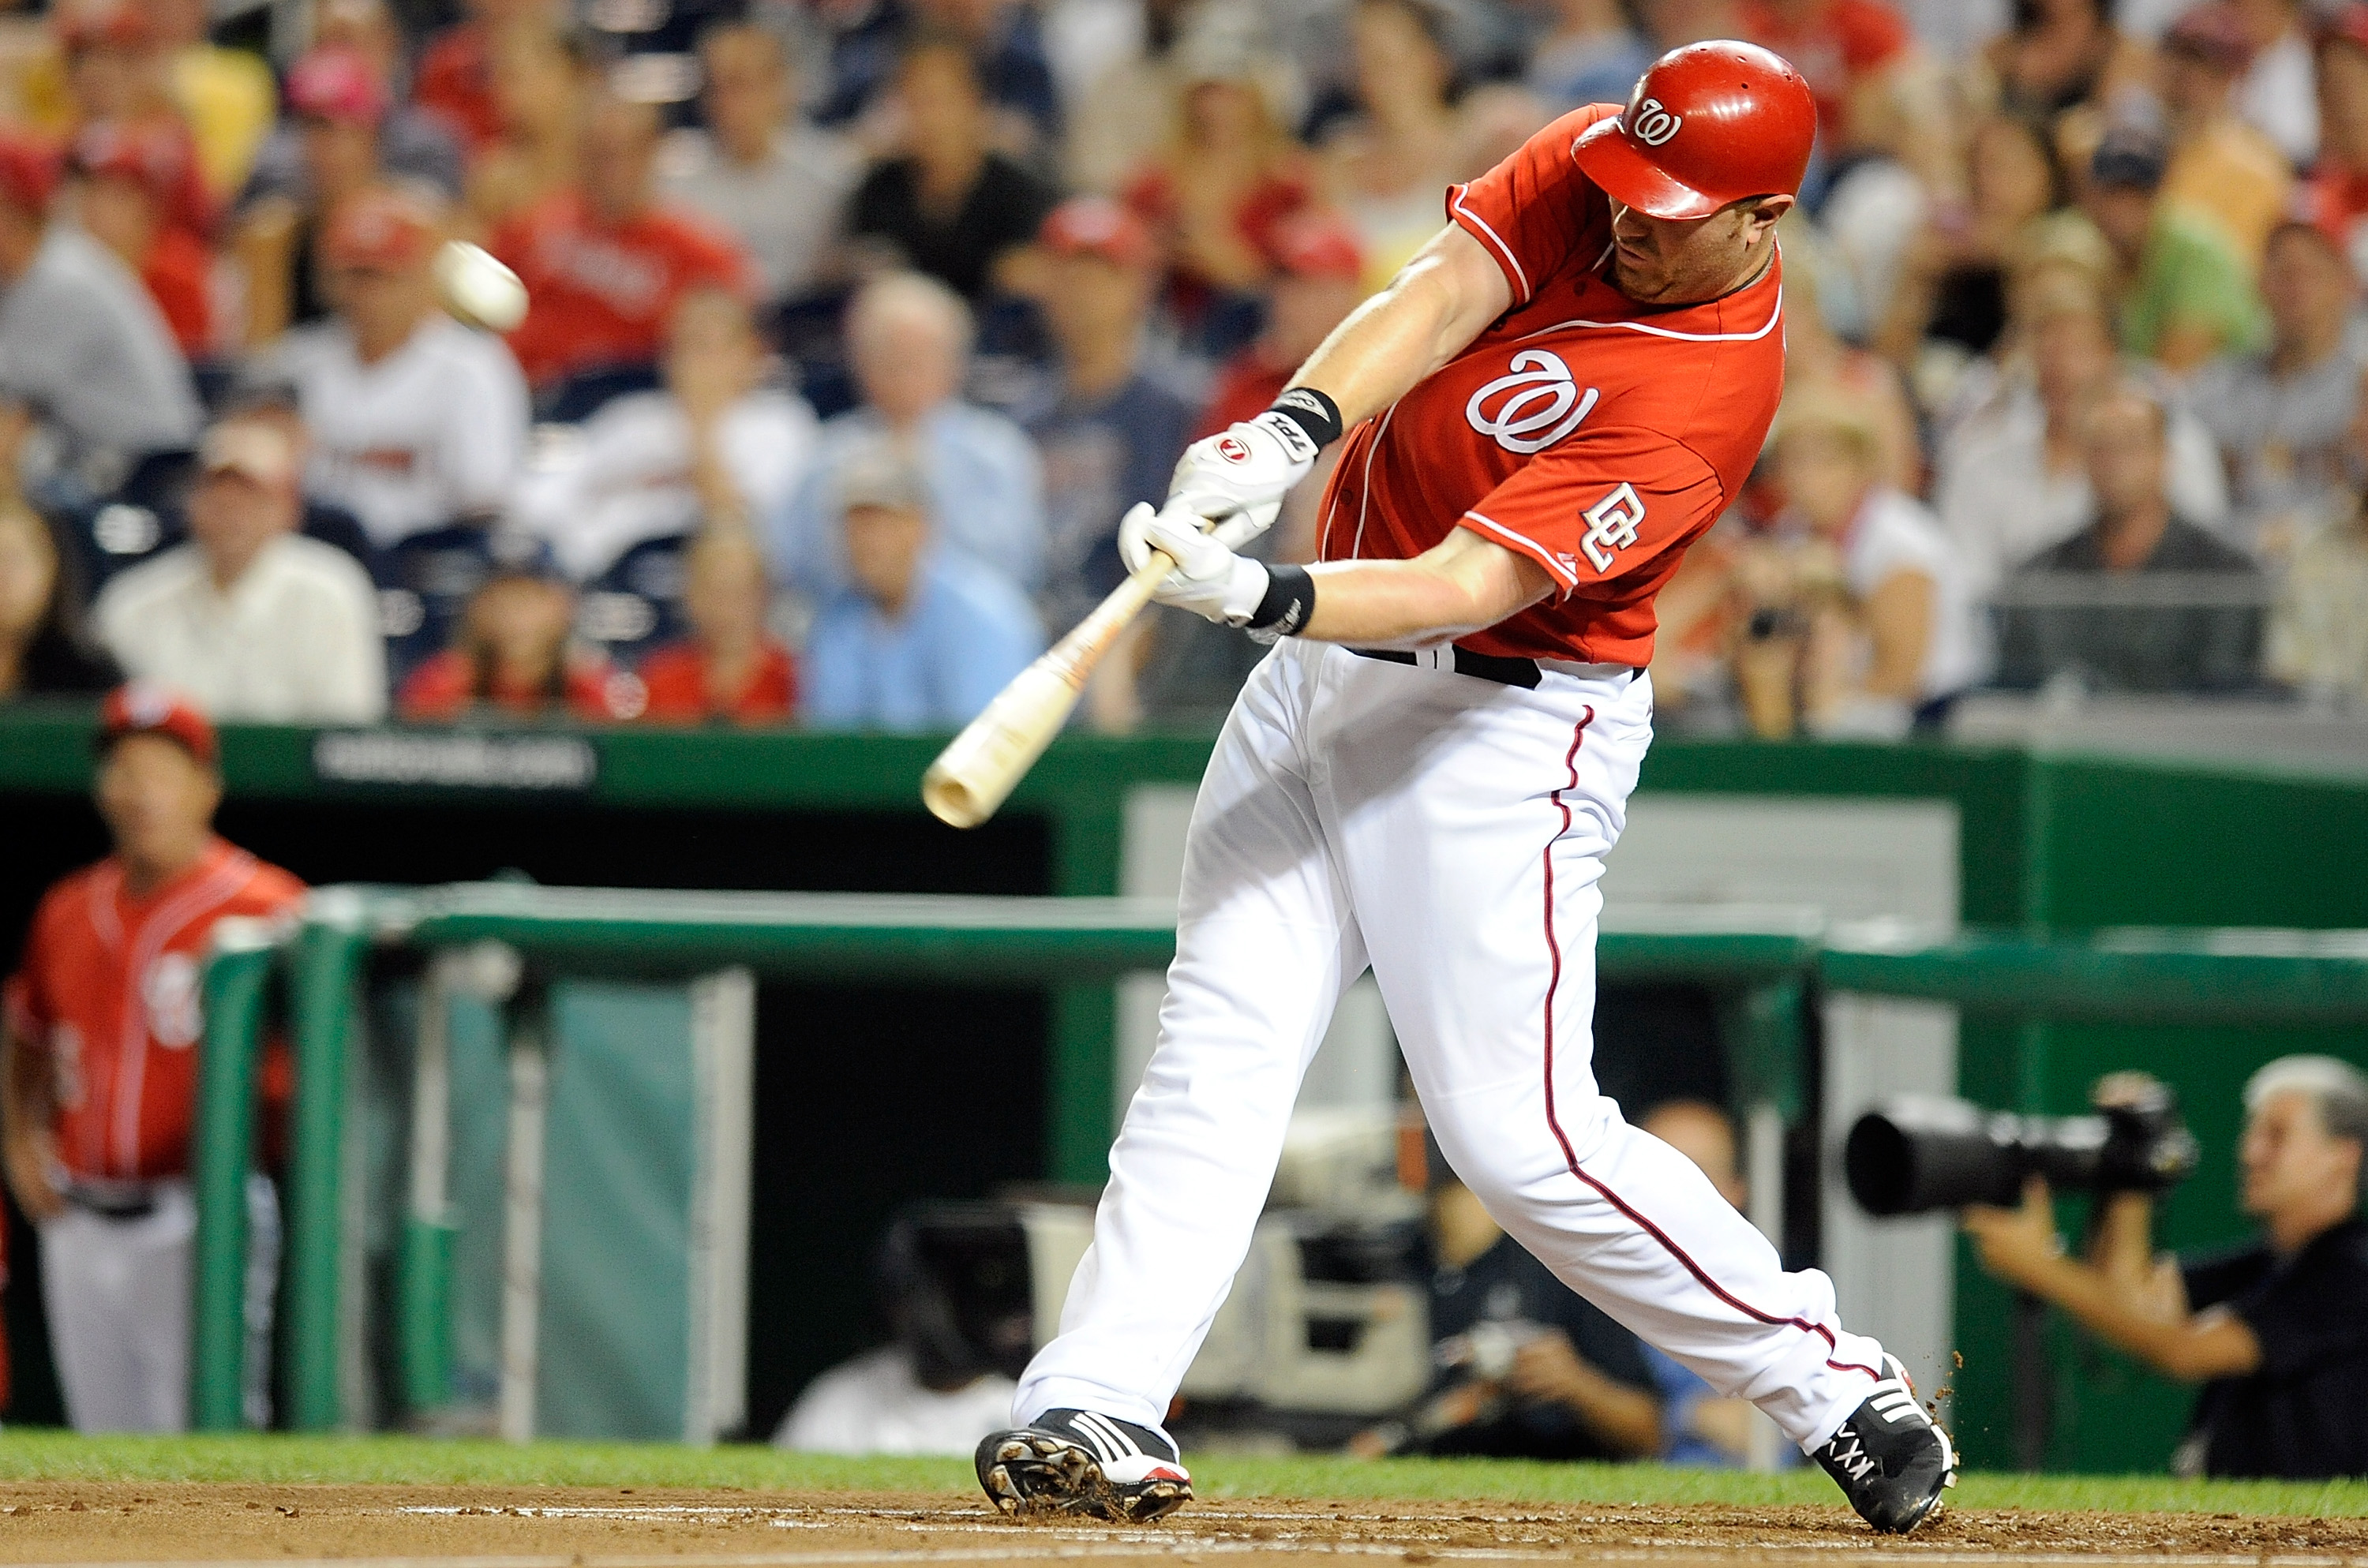 MLB Power Rankings: Jim Thome, Albert Pujols and The 10 Cleanest